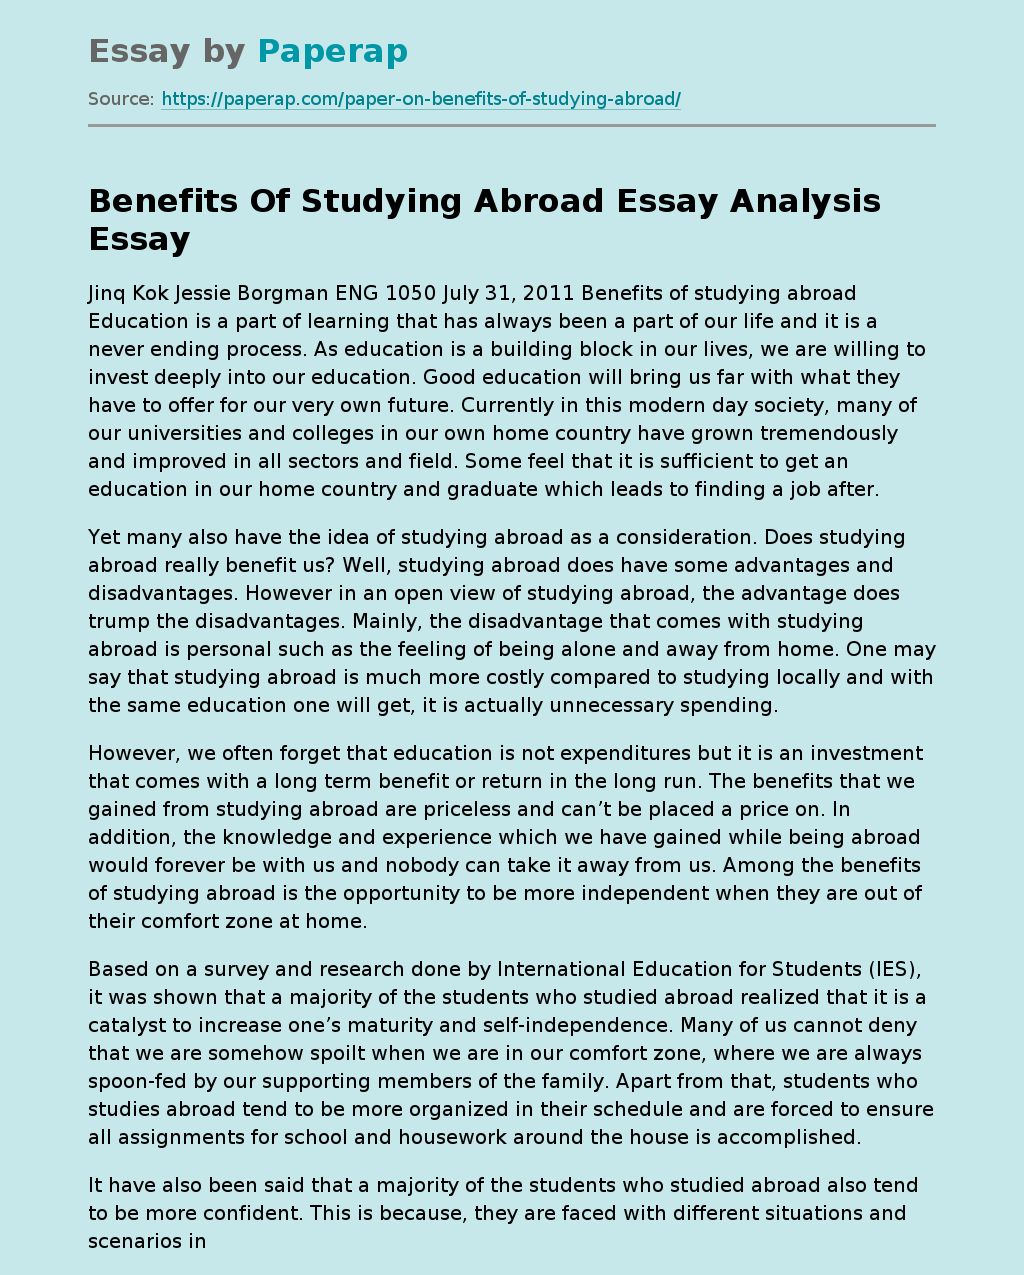 studying abroad cause and effect essay